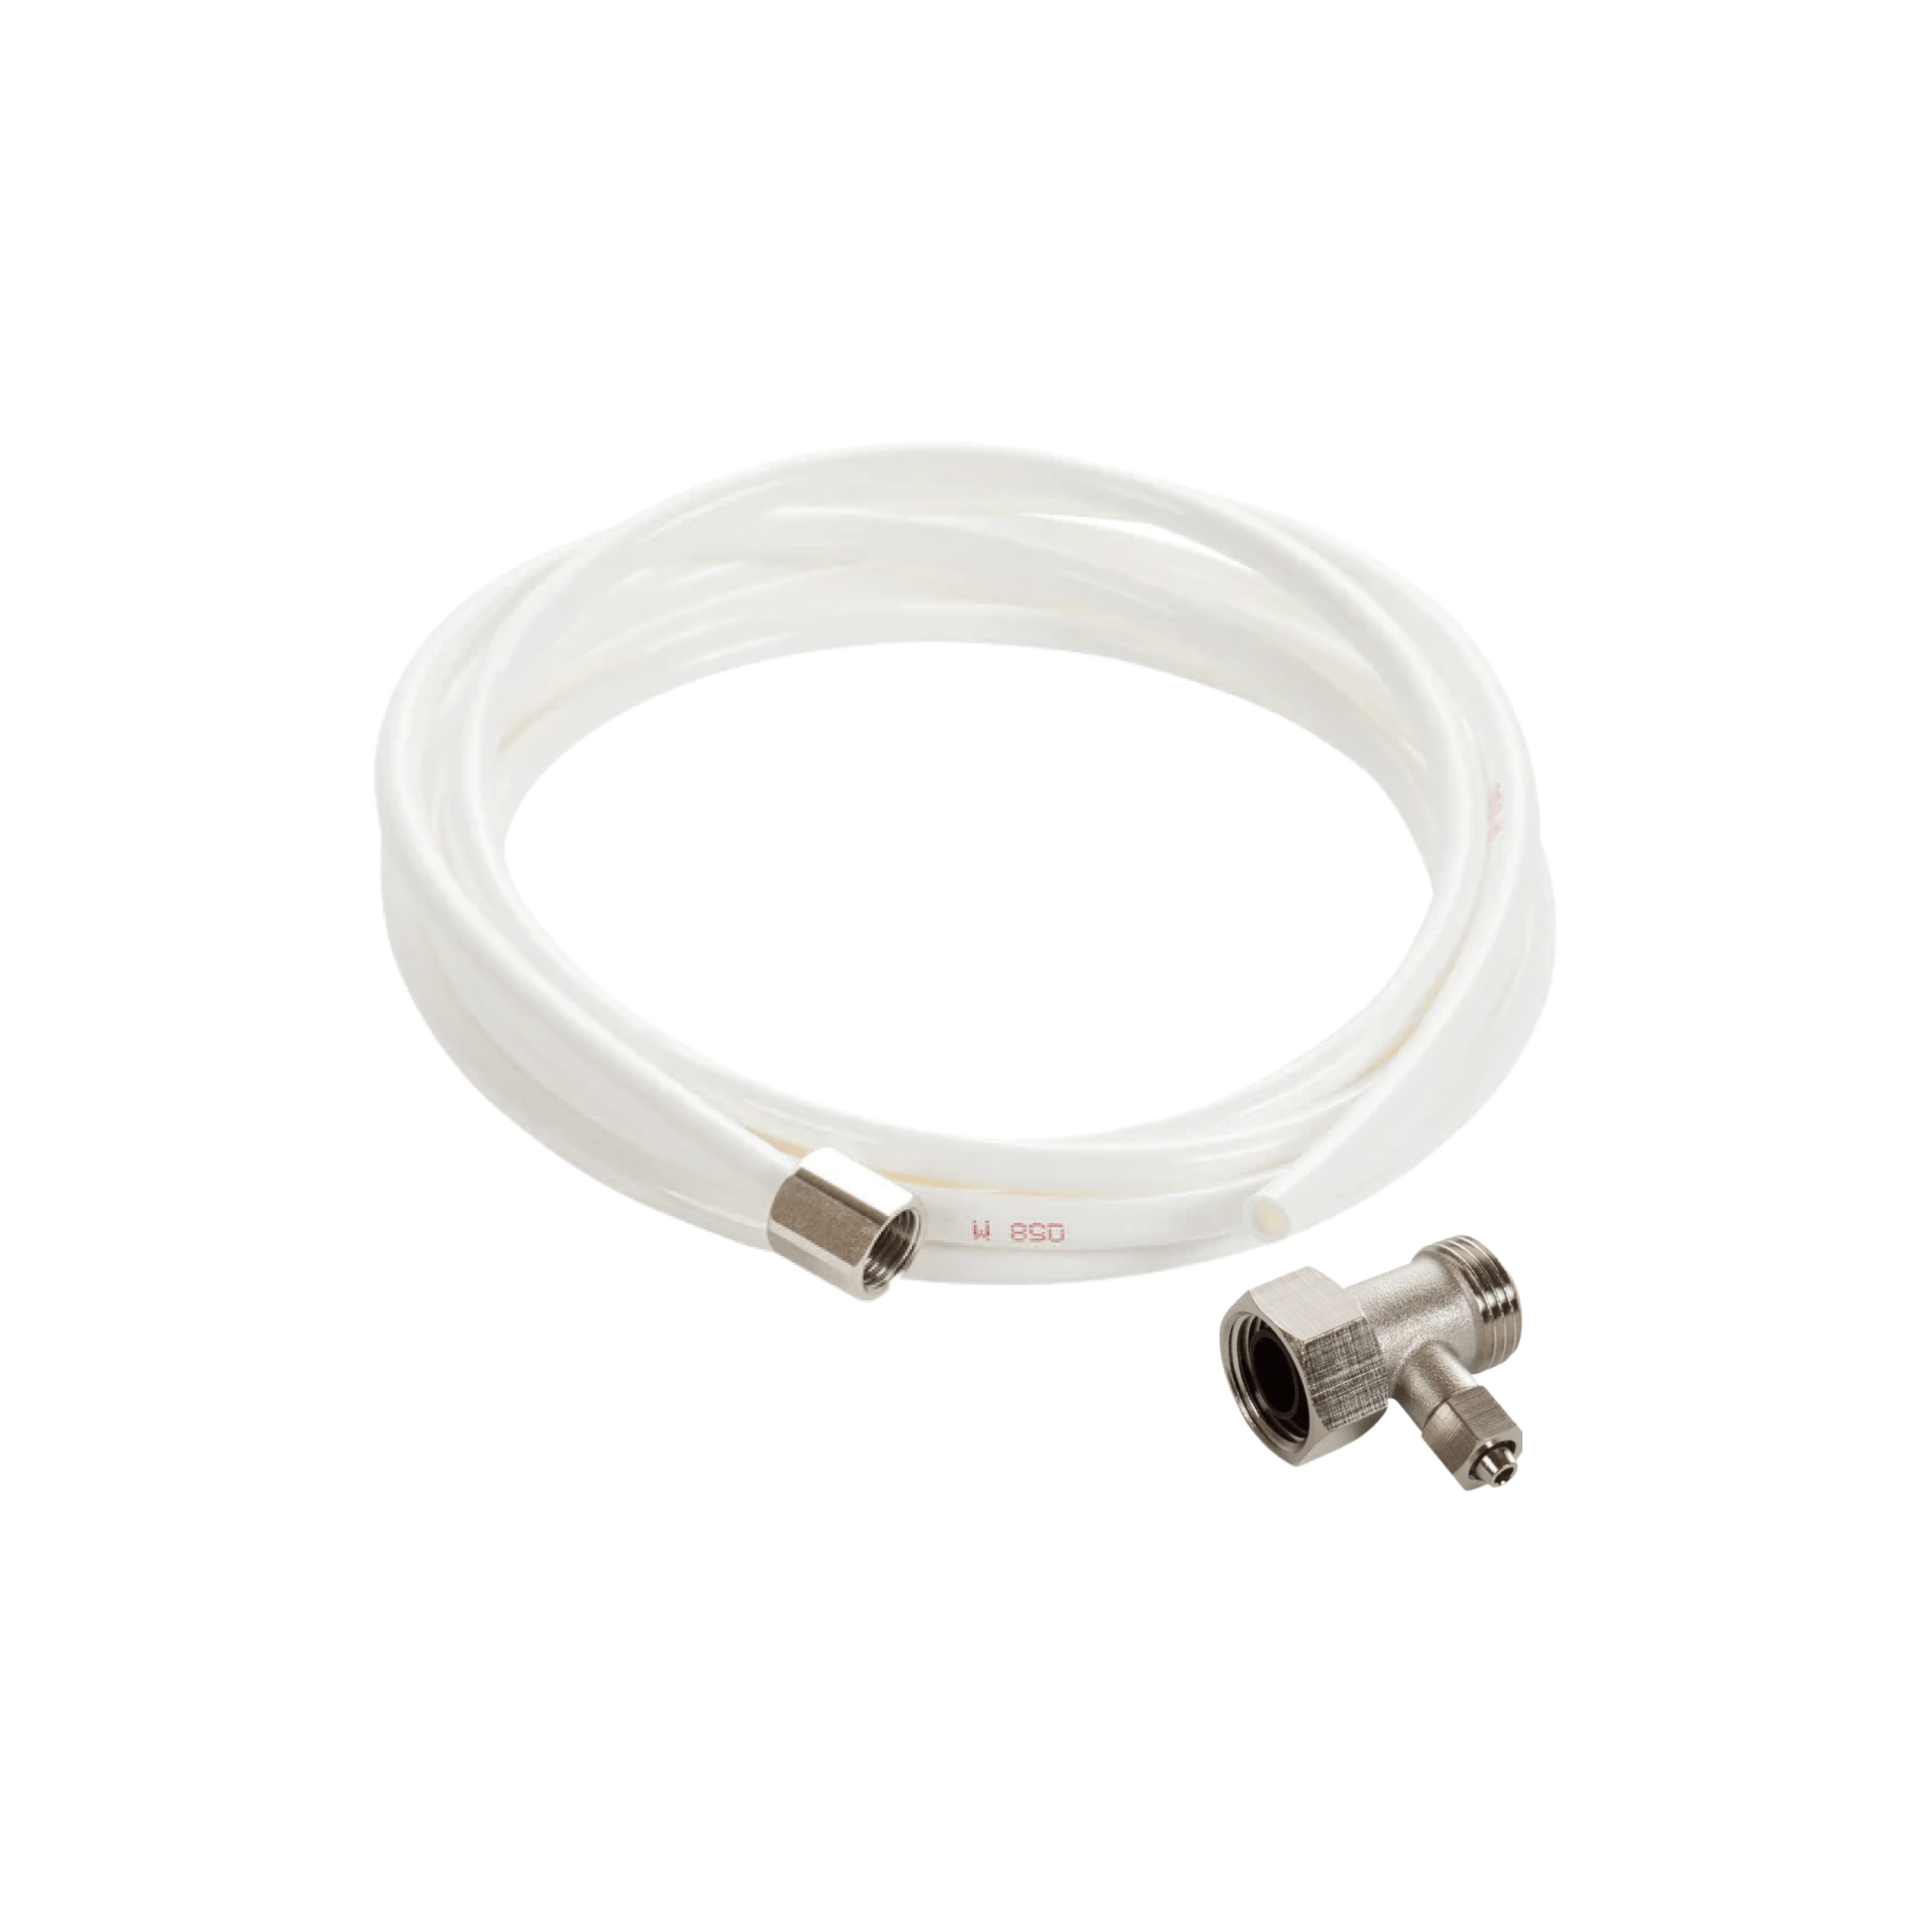 NEO Plus Accessory Kit: Alternative Installation for 1/2" Supply Valves - 10ft Plastic Bidet Hose with 1/2" Metal T-Adapter